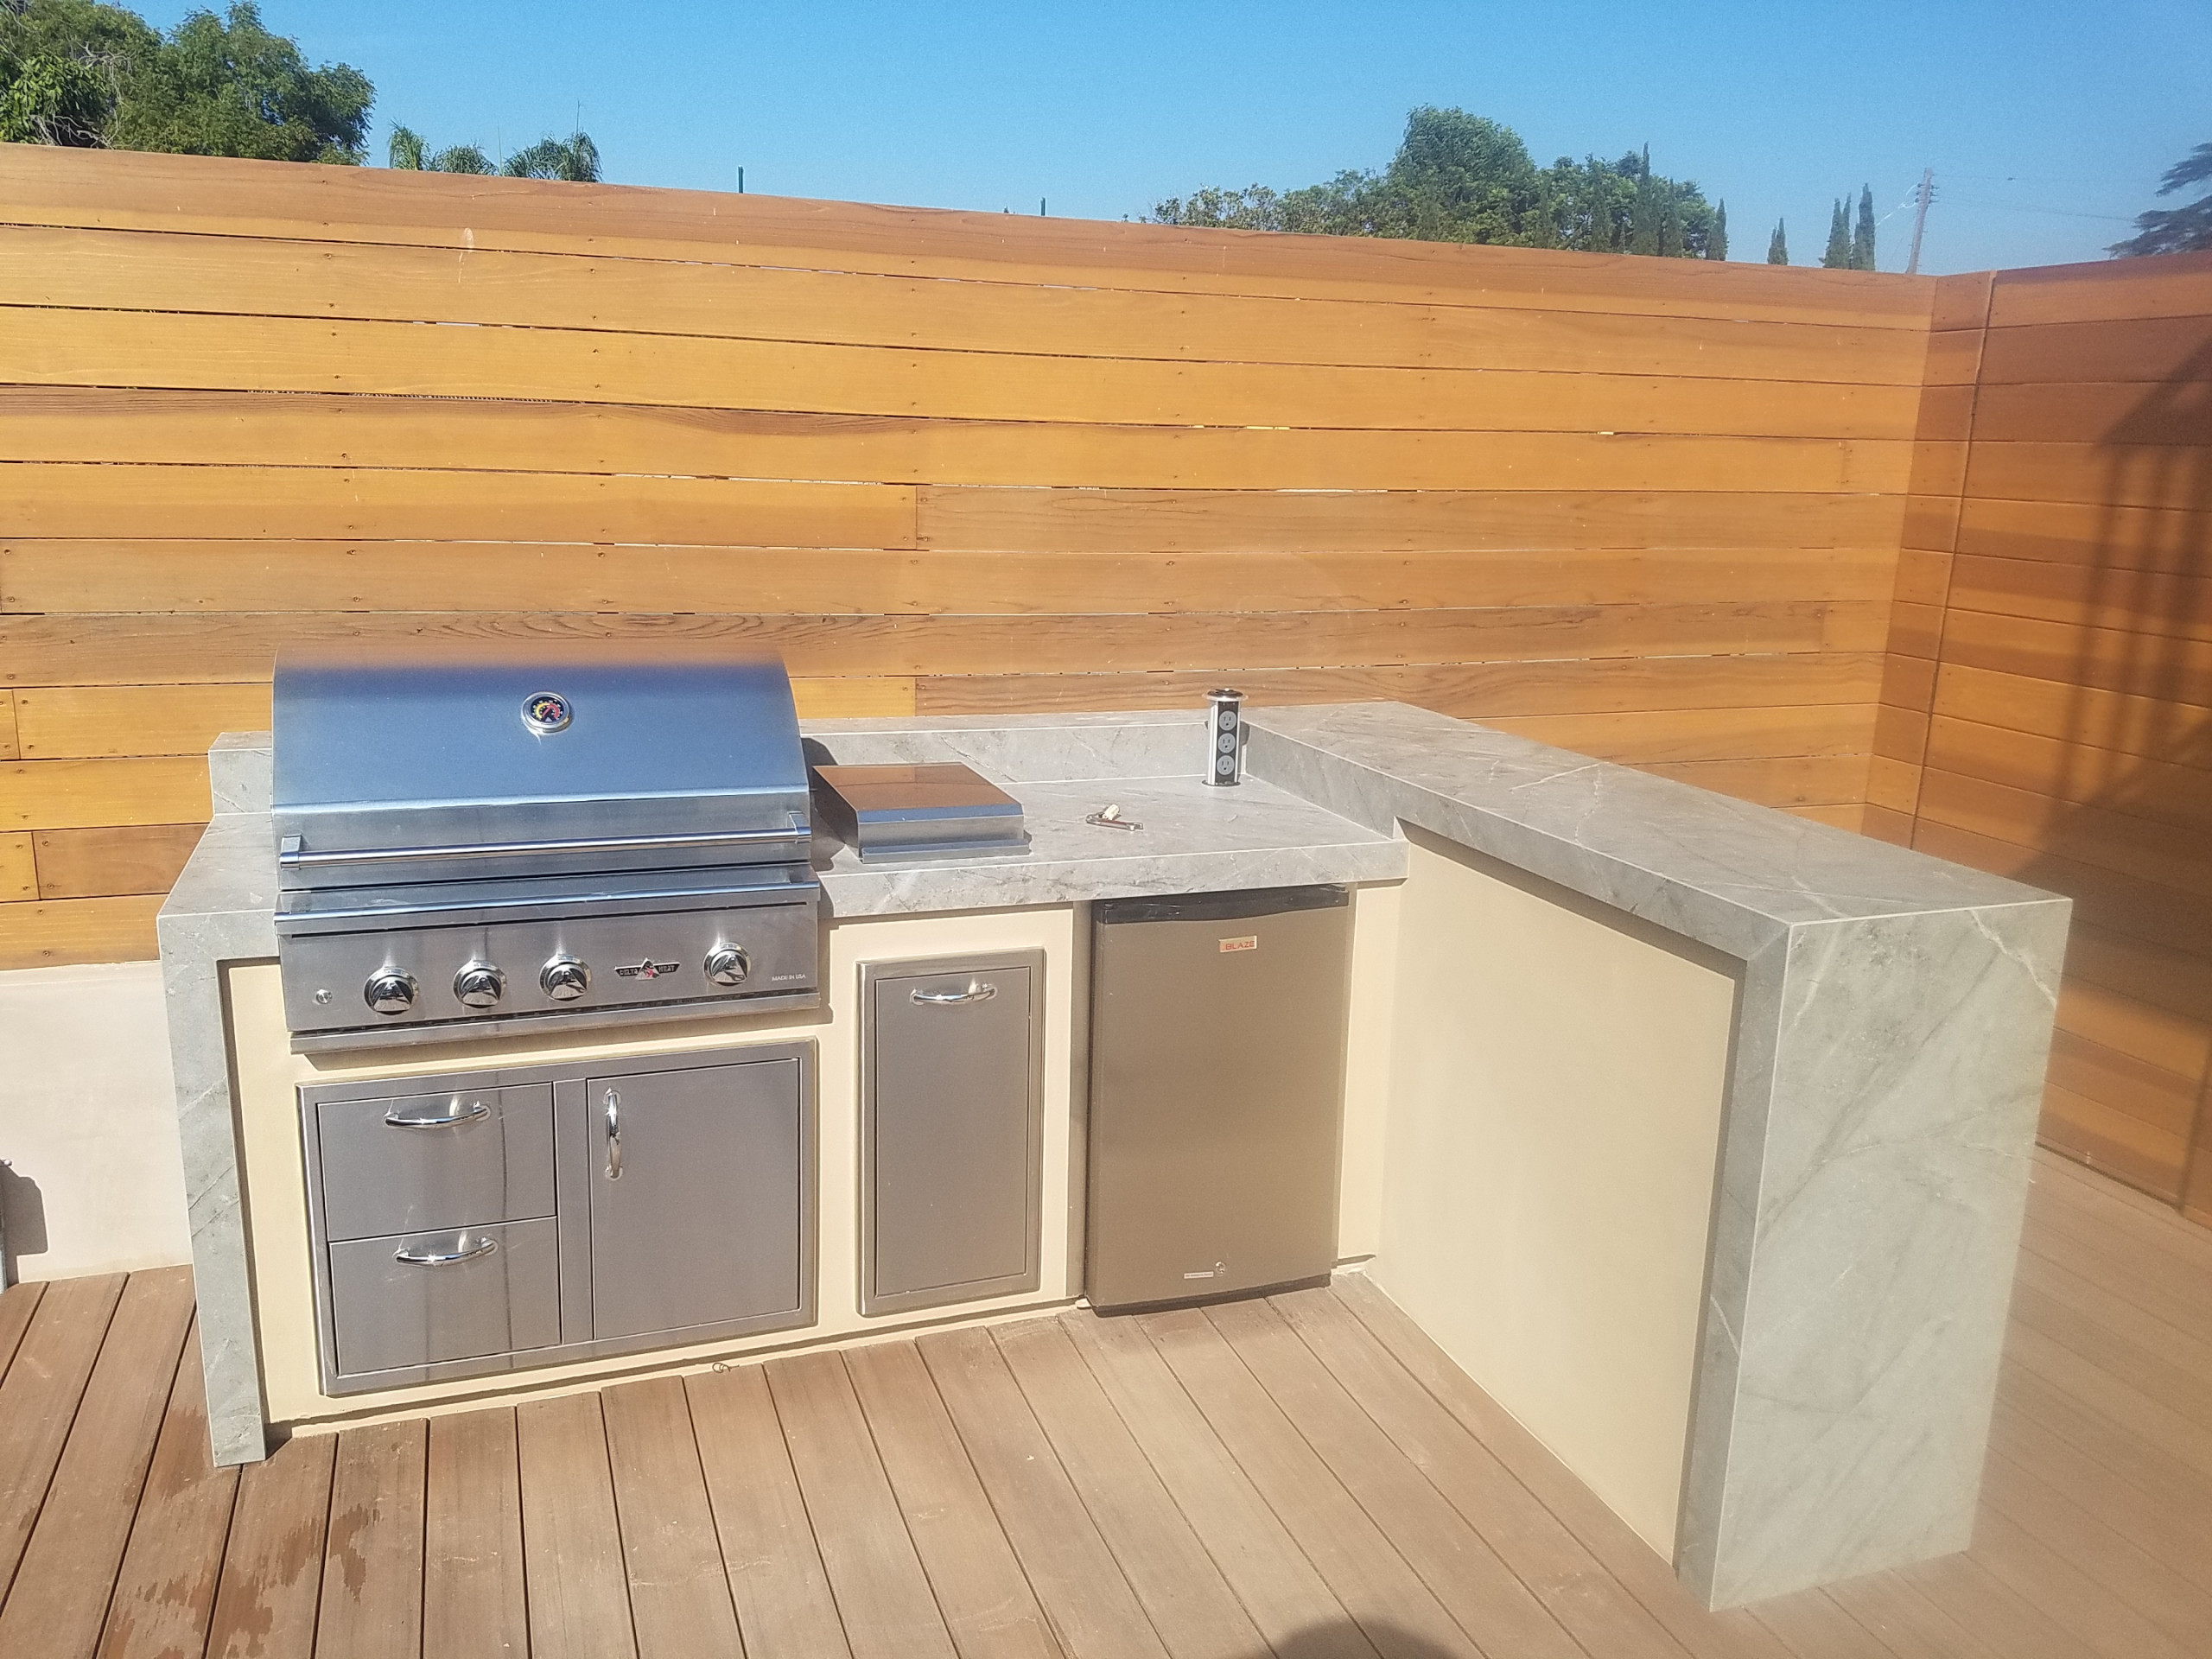 Modern L-shape outdoor kitchen with Delta Heat grill
Inspiration for a modern backyard patio kitchen remodel in Los Angeles